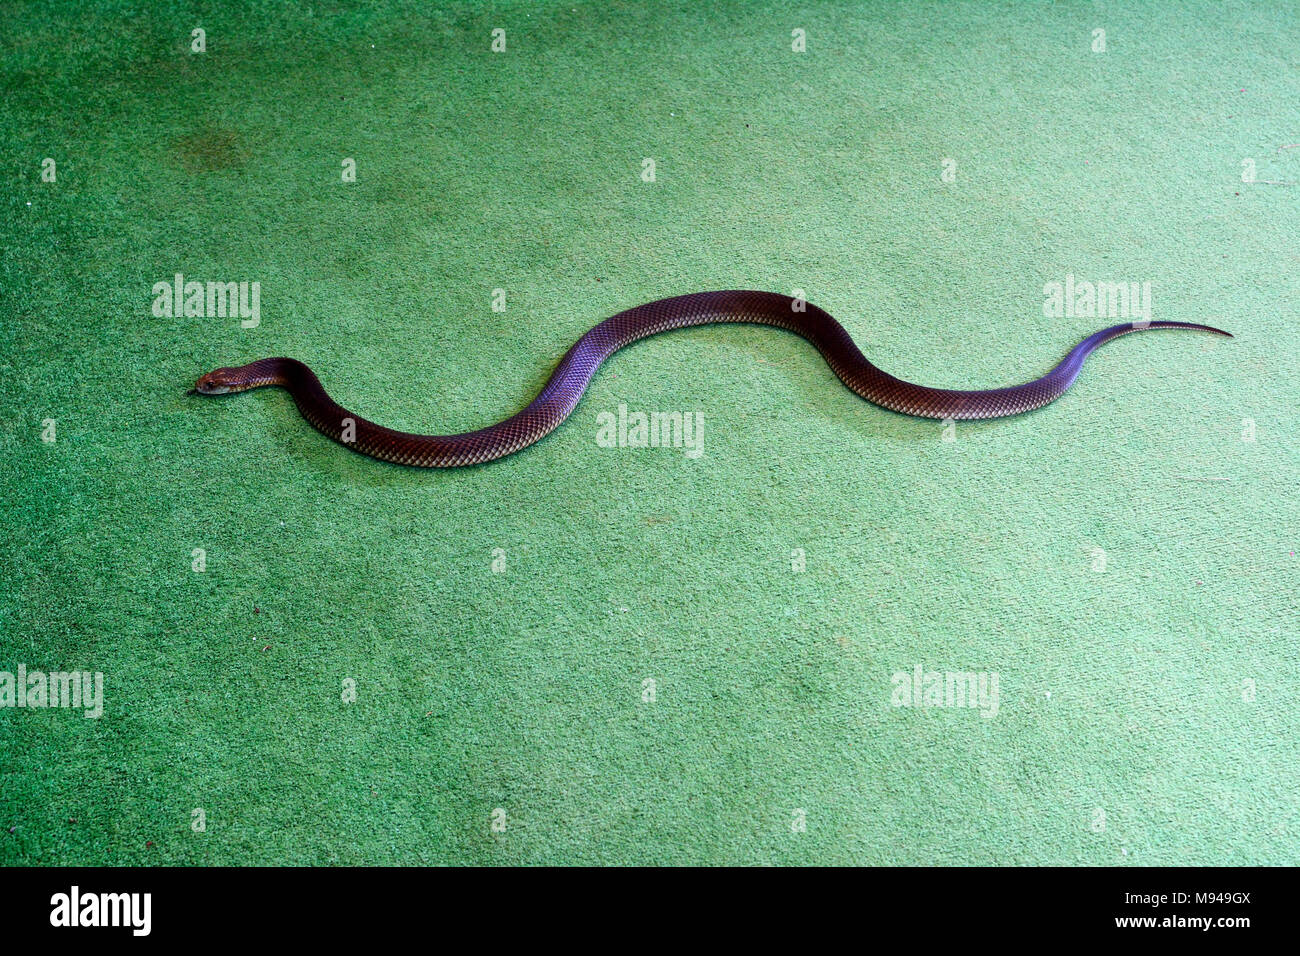 King Brown snake also known as Mulga snake (Pseudechis australis) indoor on green carpet floor. This is one of the longest venomous snakes in the worl Stock Photo